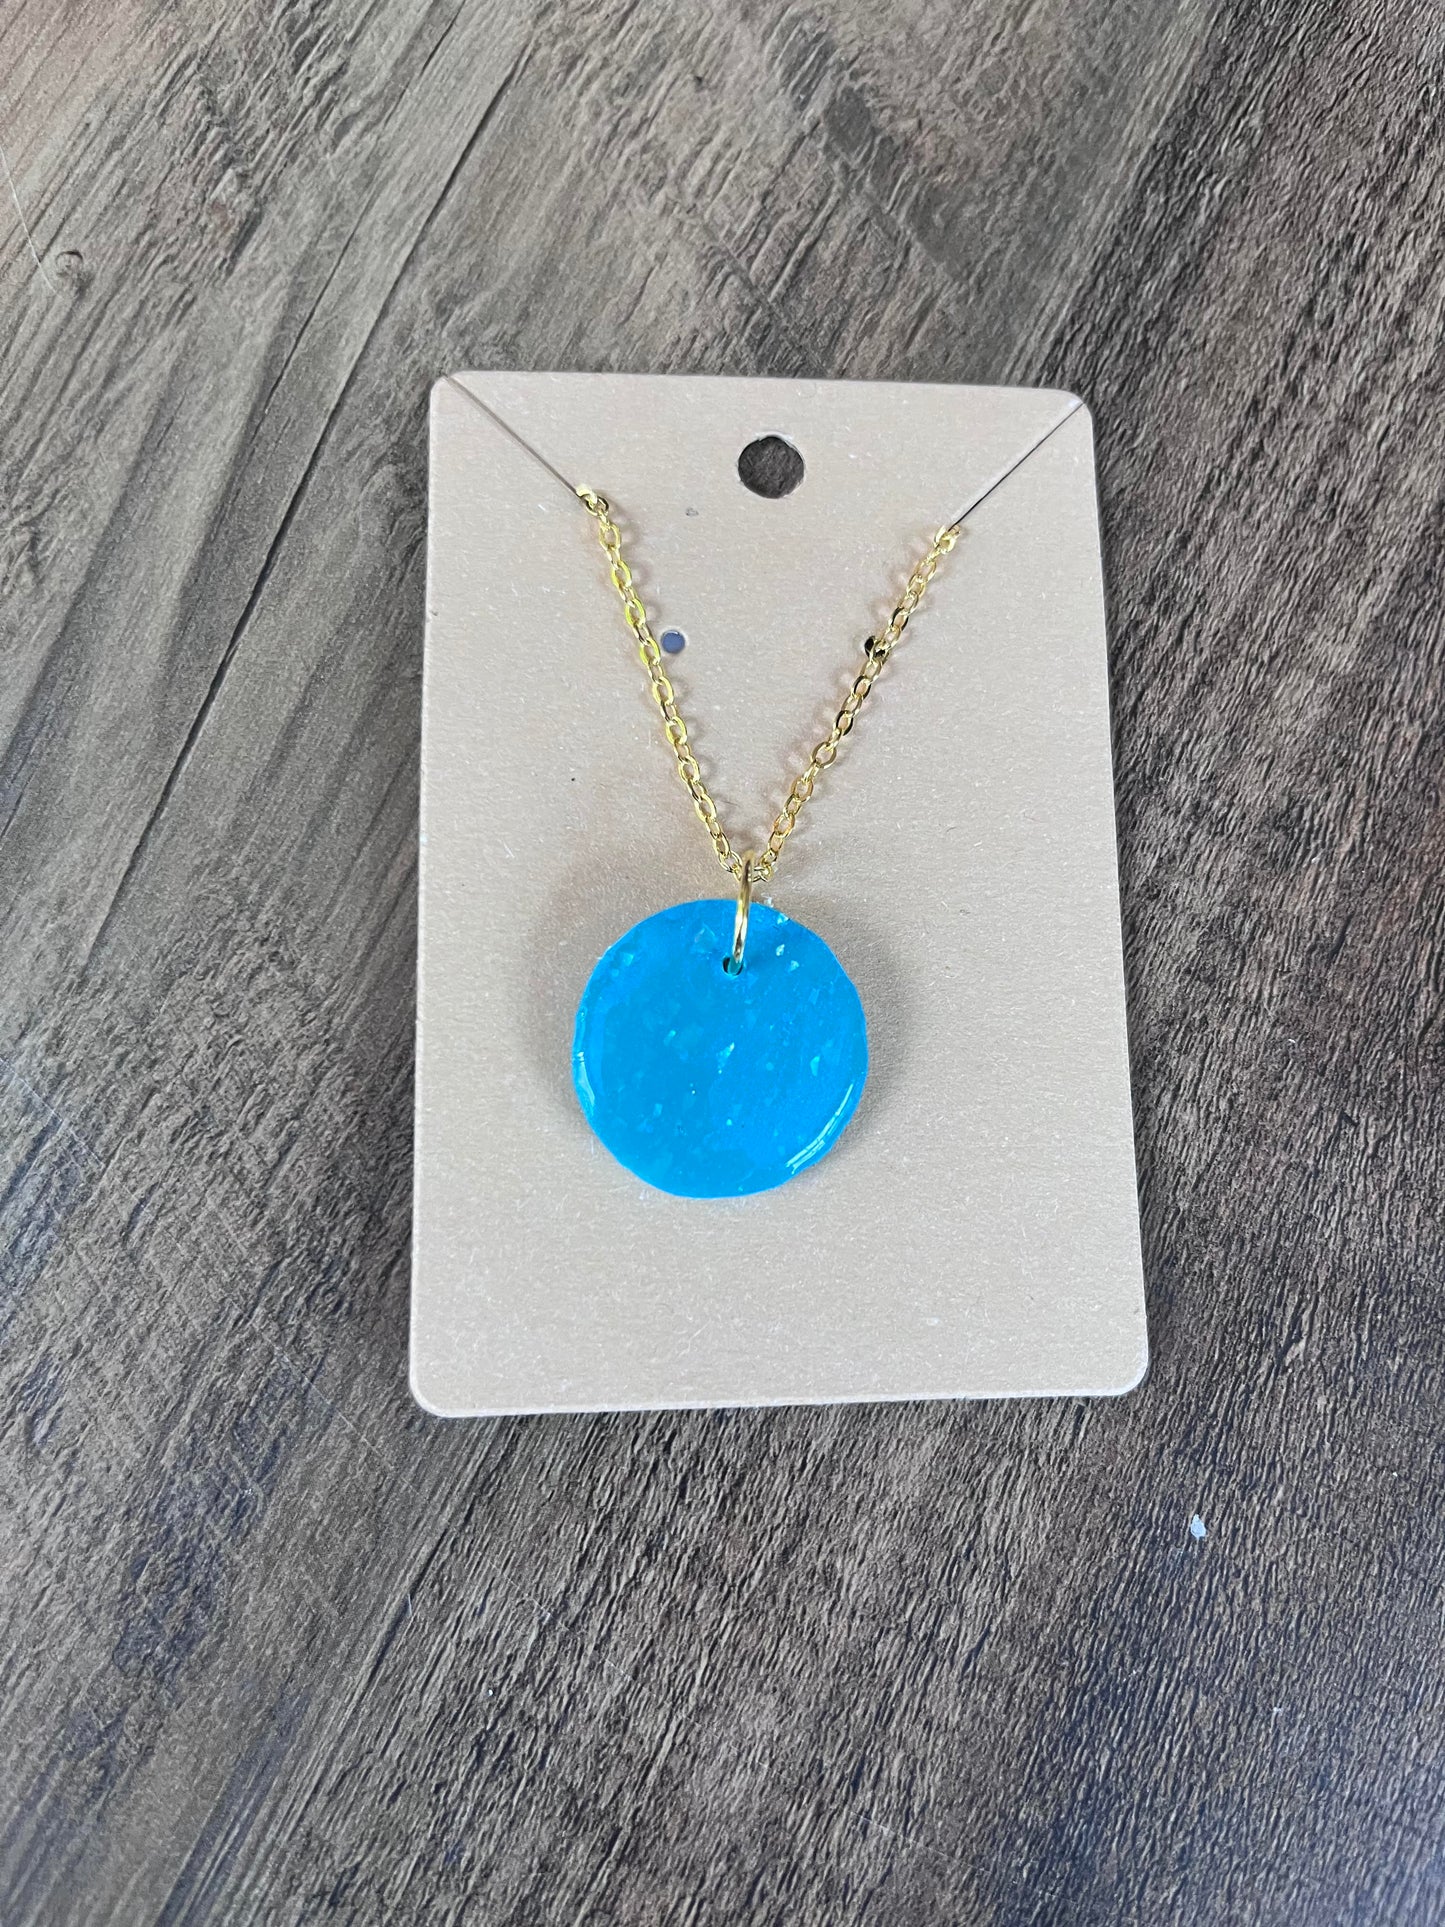 Clay Necklaces in "Turquoise Shimmer" Design